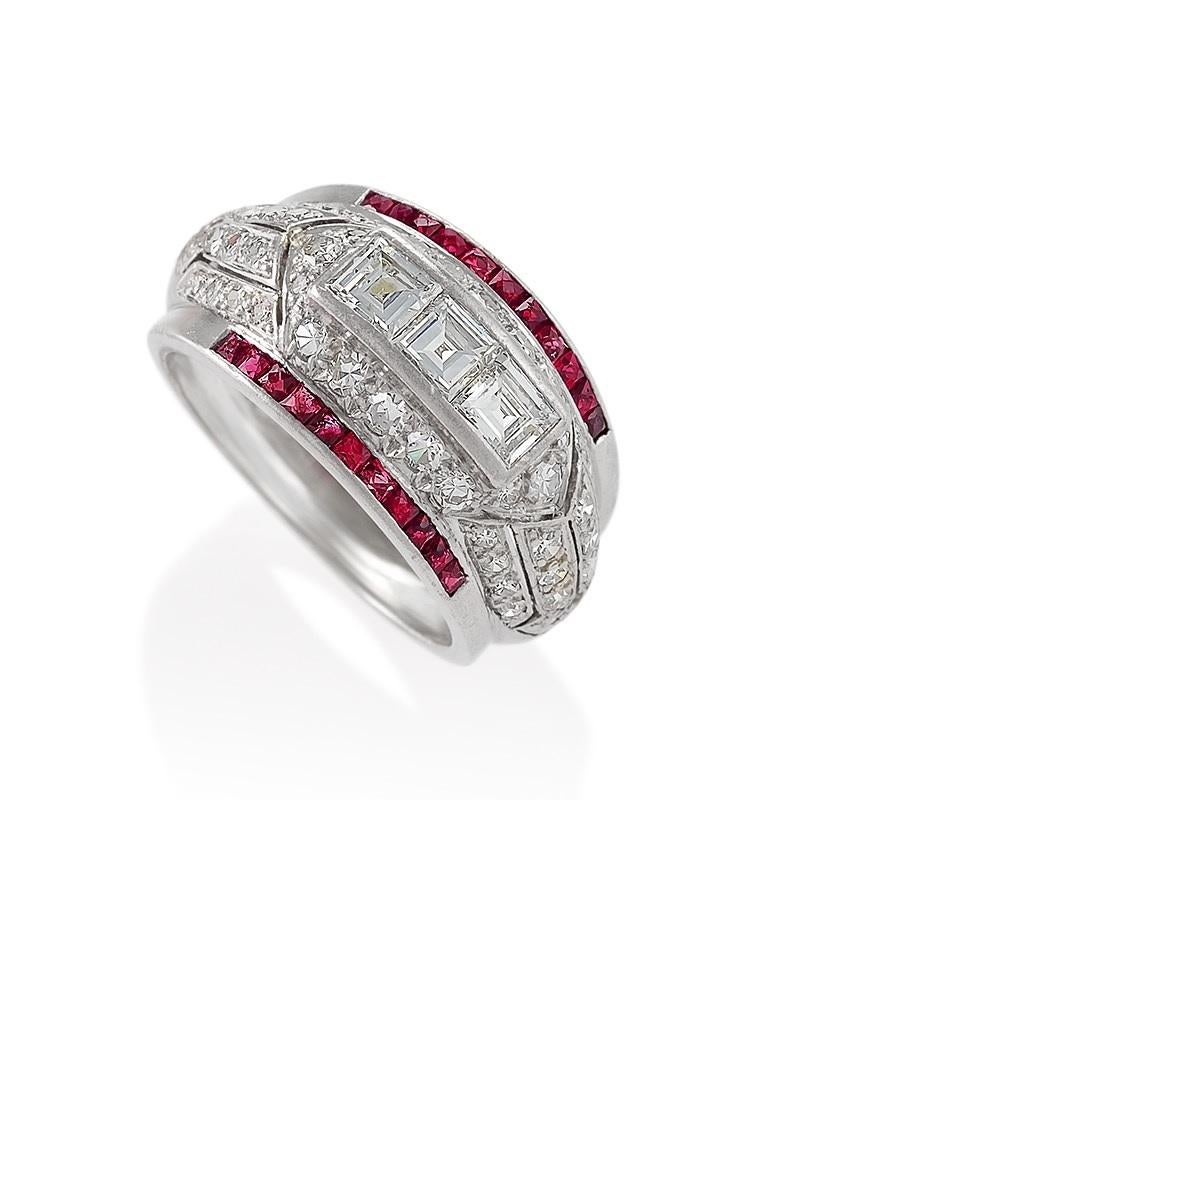 An Art Deco platinum ring with diamonds and rubies. The ring has 50 round diamonds with an approximate total weight of 1.20 carats, 3 square-cut diamonds with an approximate total weight of .90 carat, and 22 French-cut rubies with an approximate